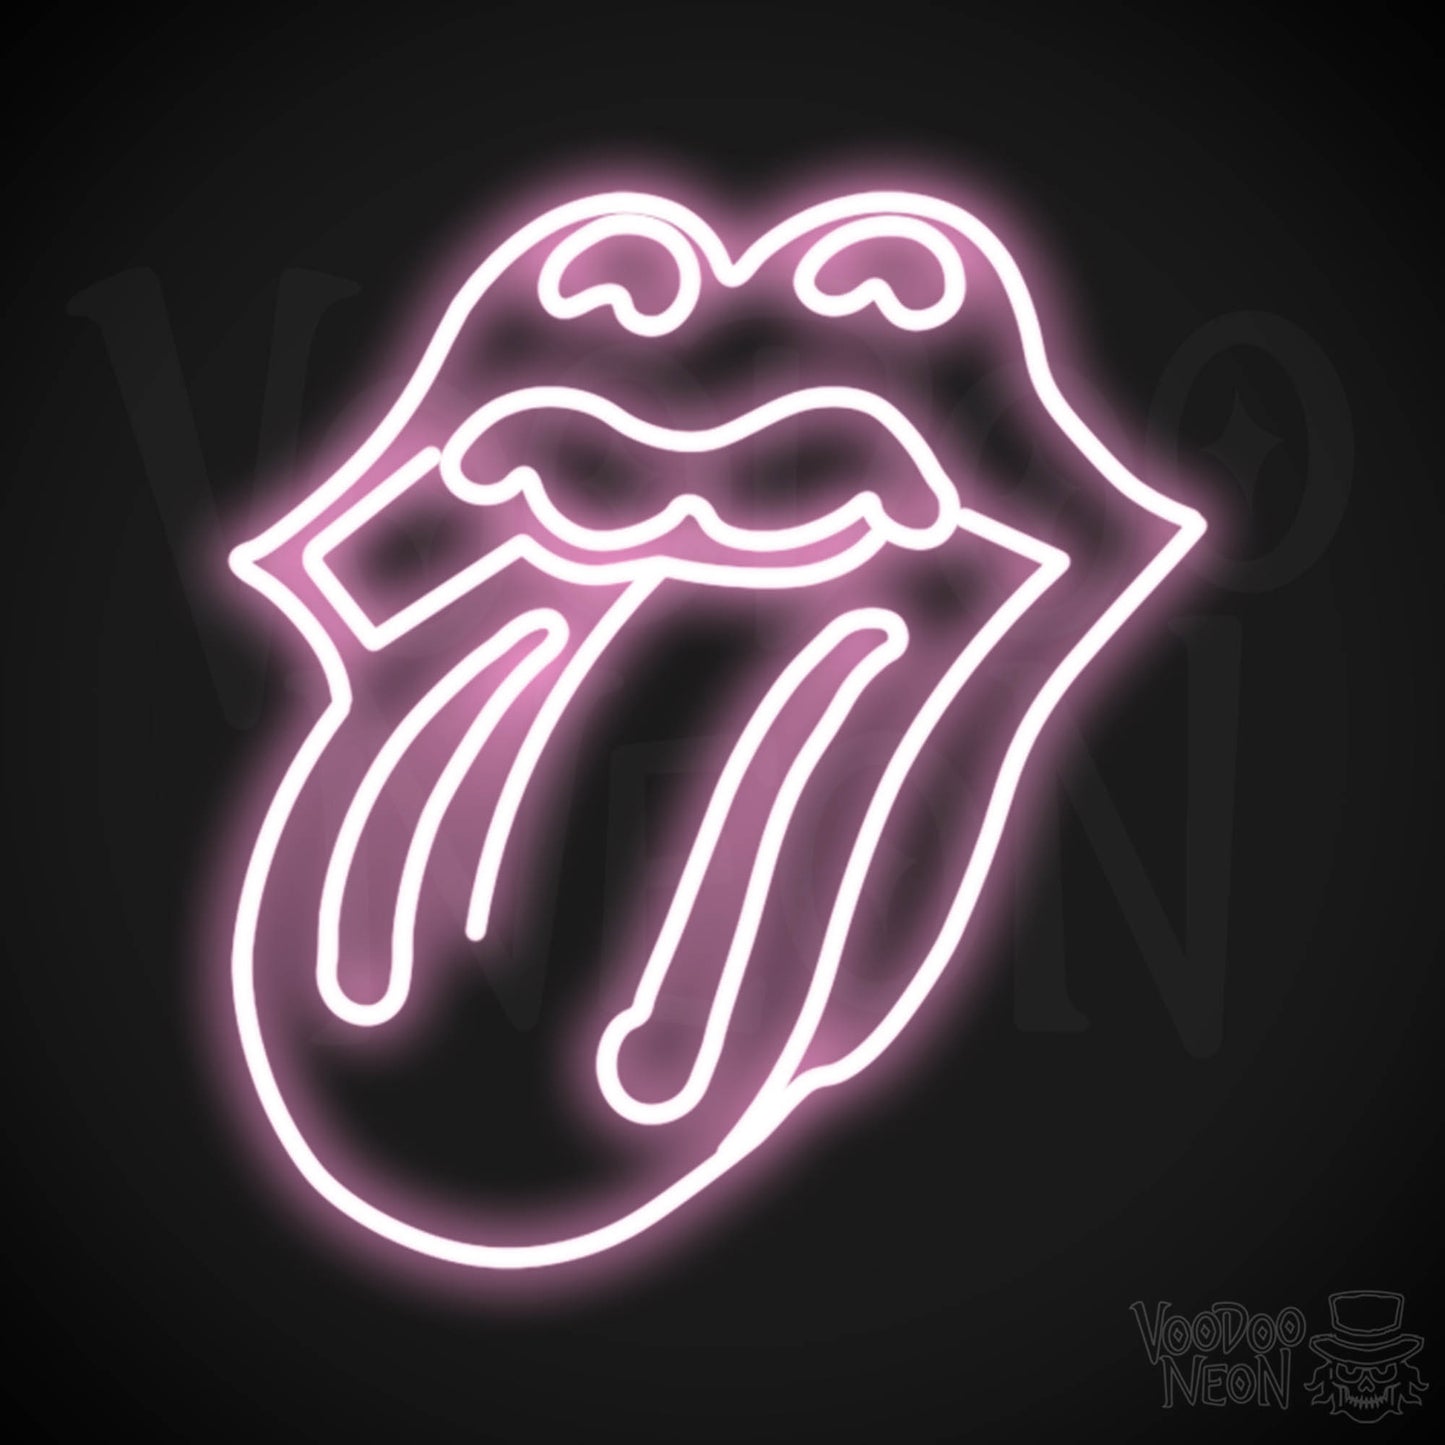 Rolling Stones Neon Sign - Rolling Stones Sign - Neon Rolling Stones Logo Wall Art - Color Light Pink